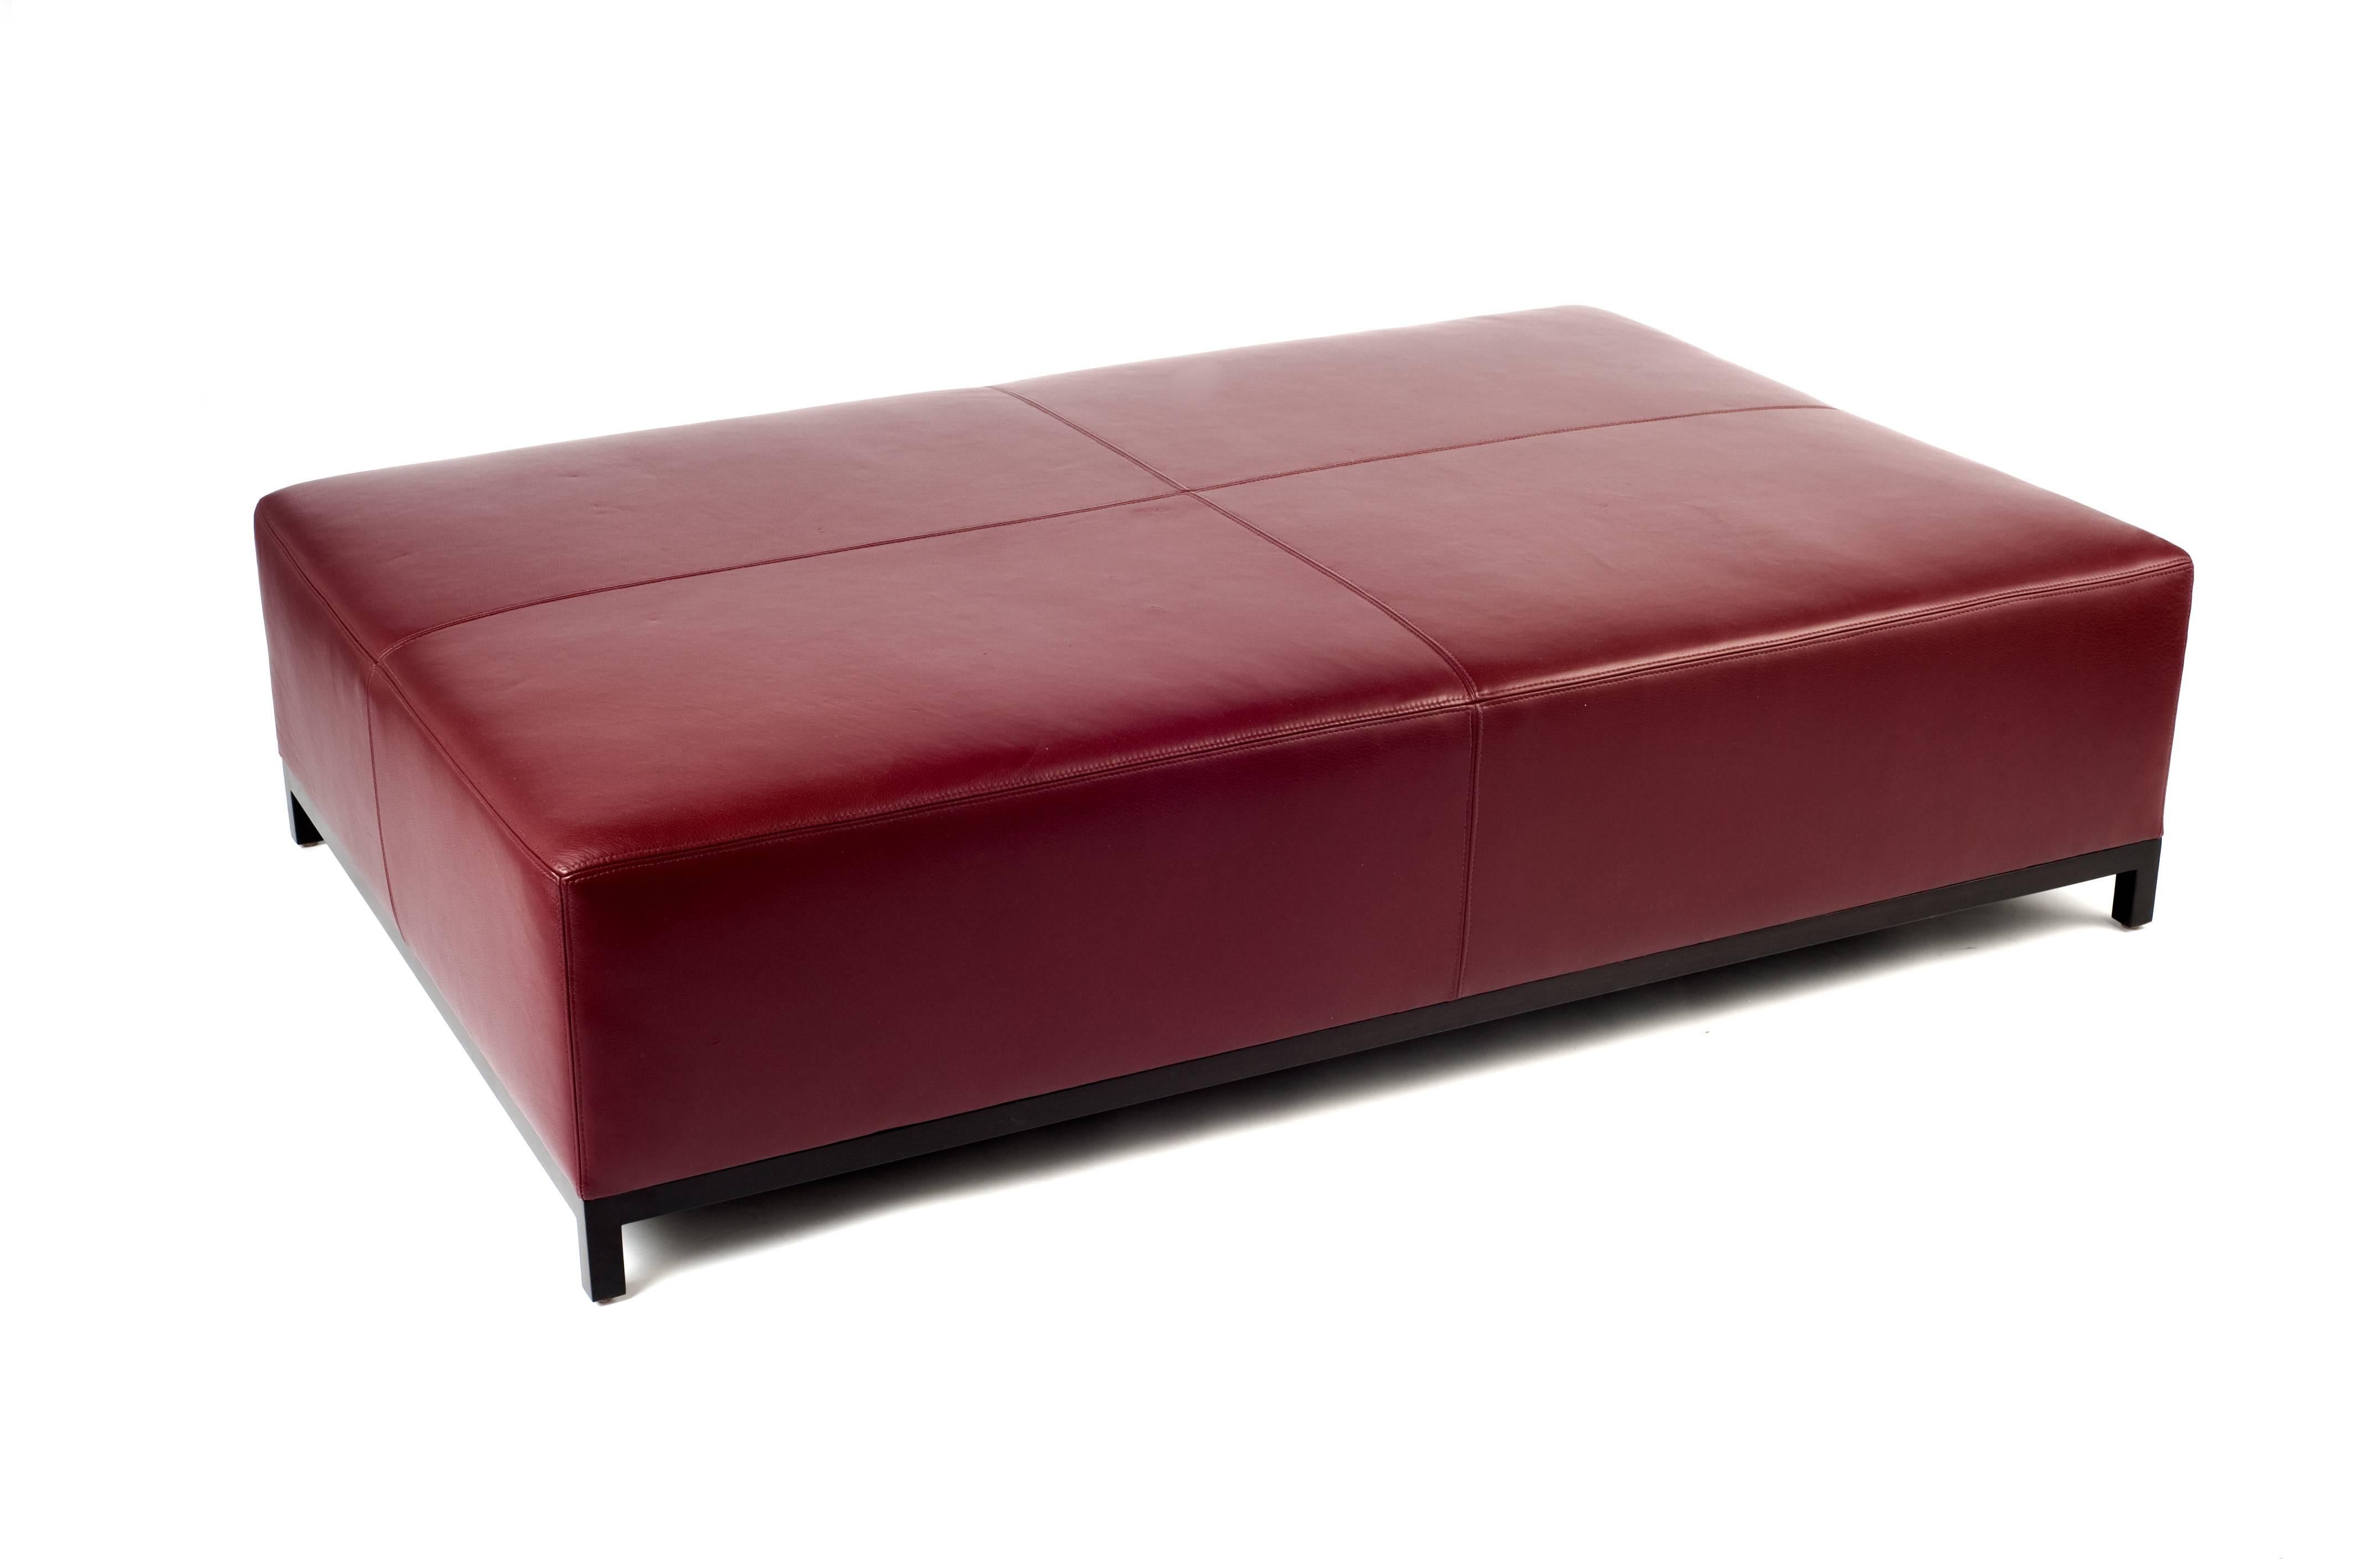 Lavish and luxurious, this ottoman is large enough to act as a stand-alone piece in any space that needs definition.